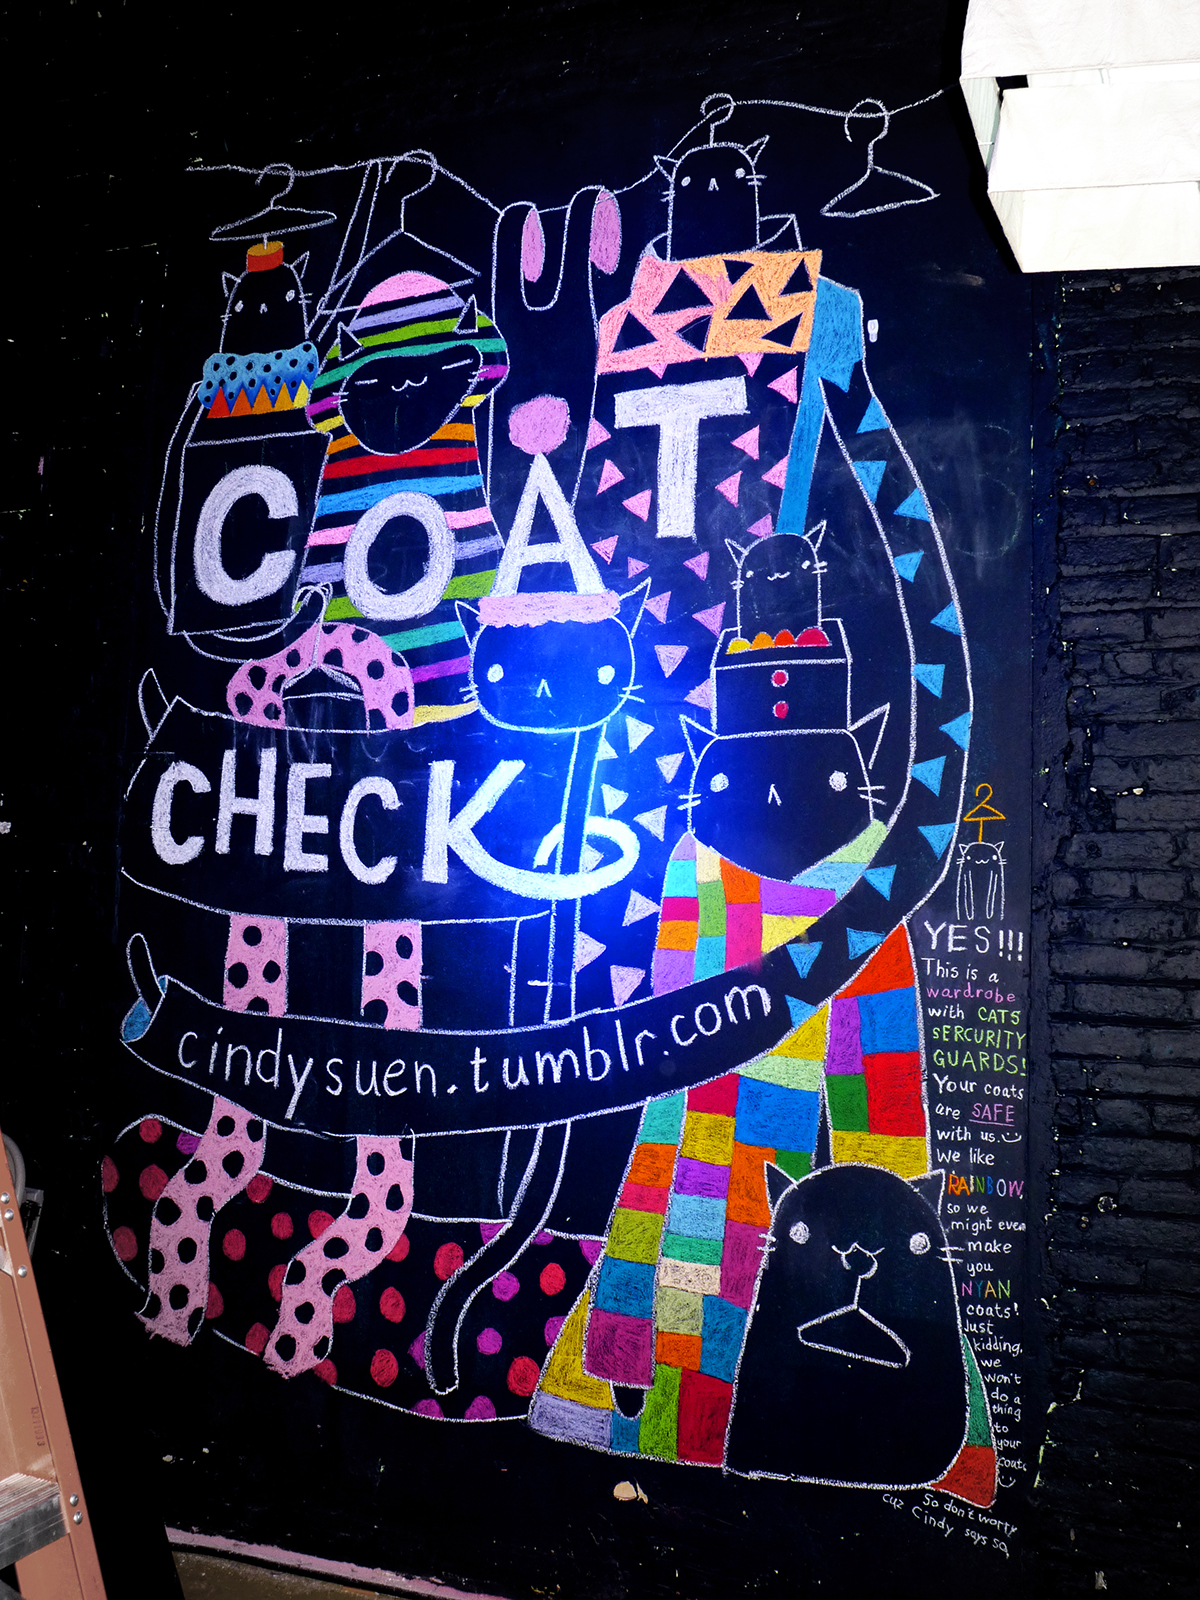 tumblr year in review Mural chalk Cat animals COAT CHECK coat Wall Mural triangle rainbow